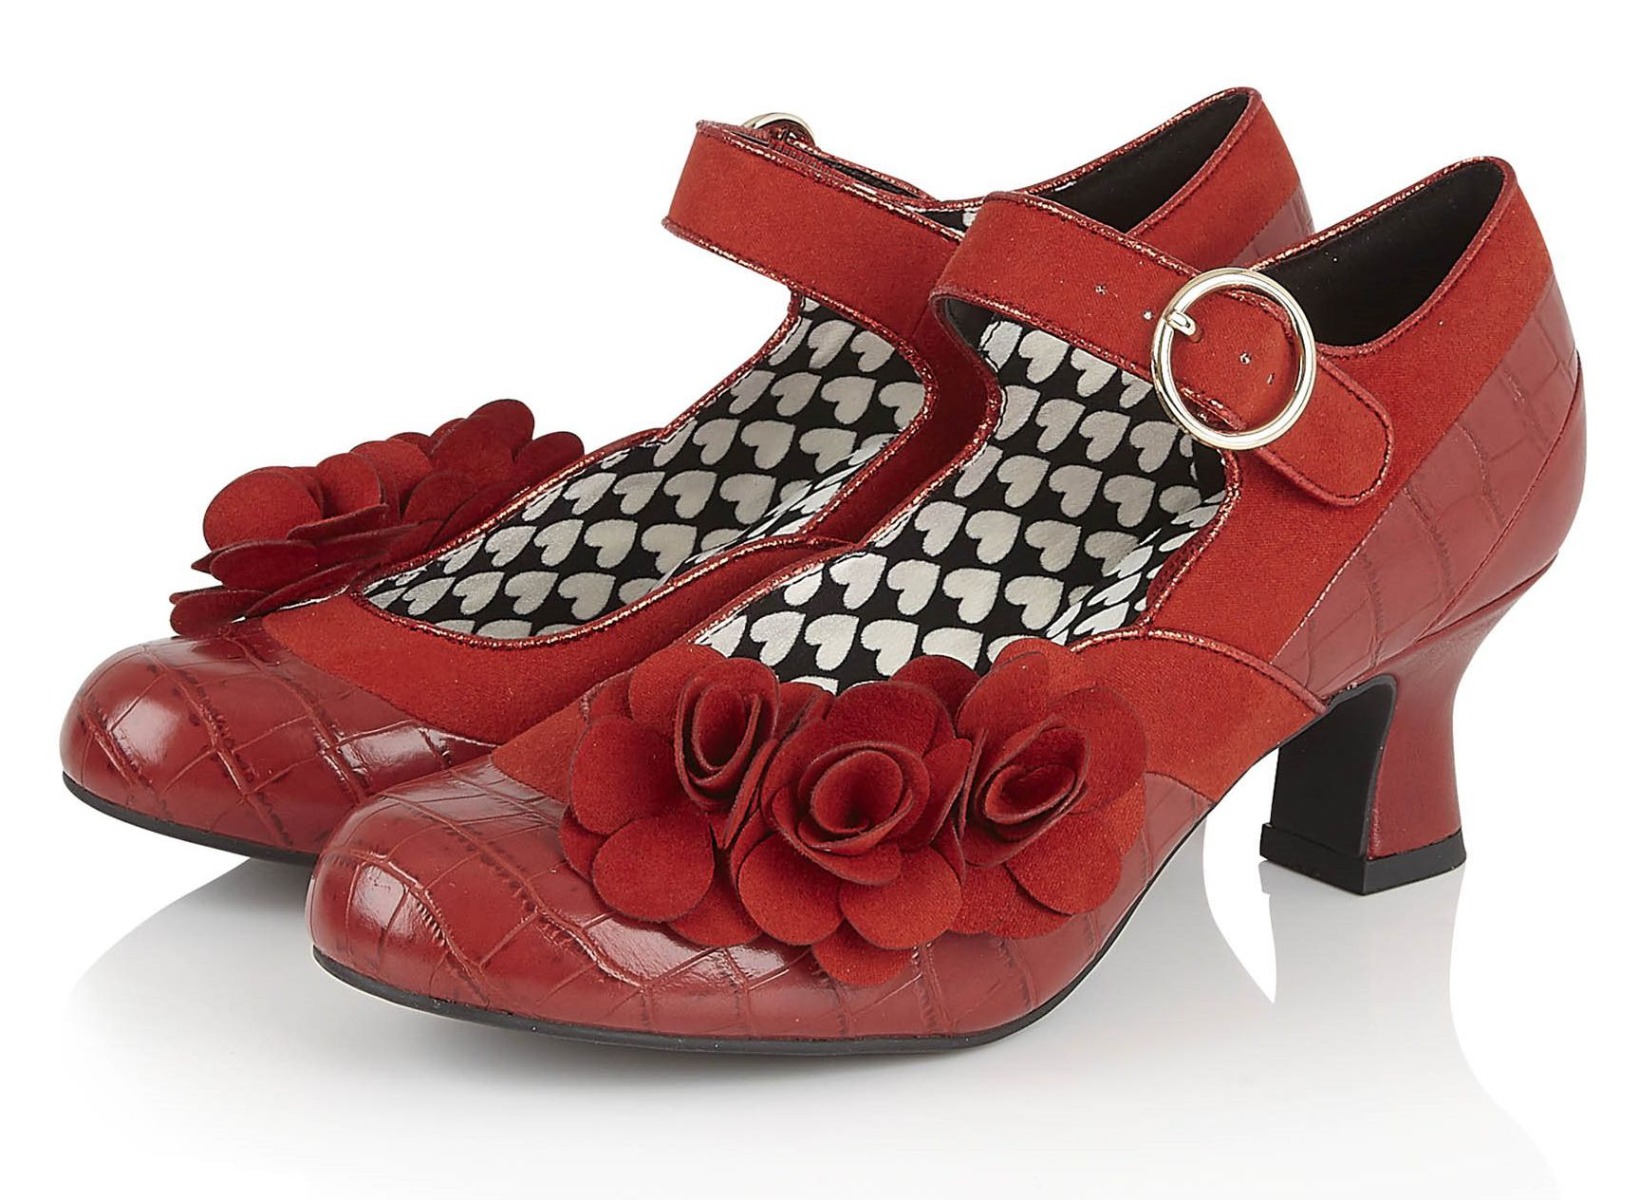 rs09346_chaussures-escarpins-pin-up-retro-50-s-glam-chic-mabel-rouge